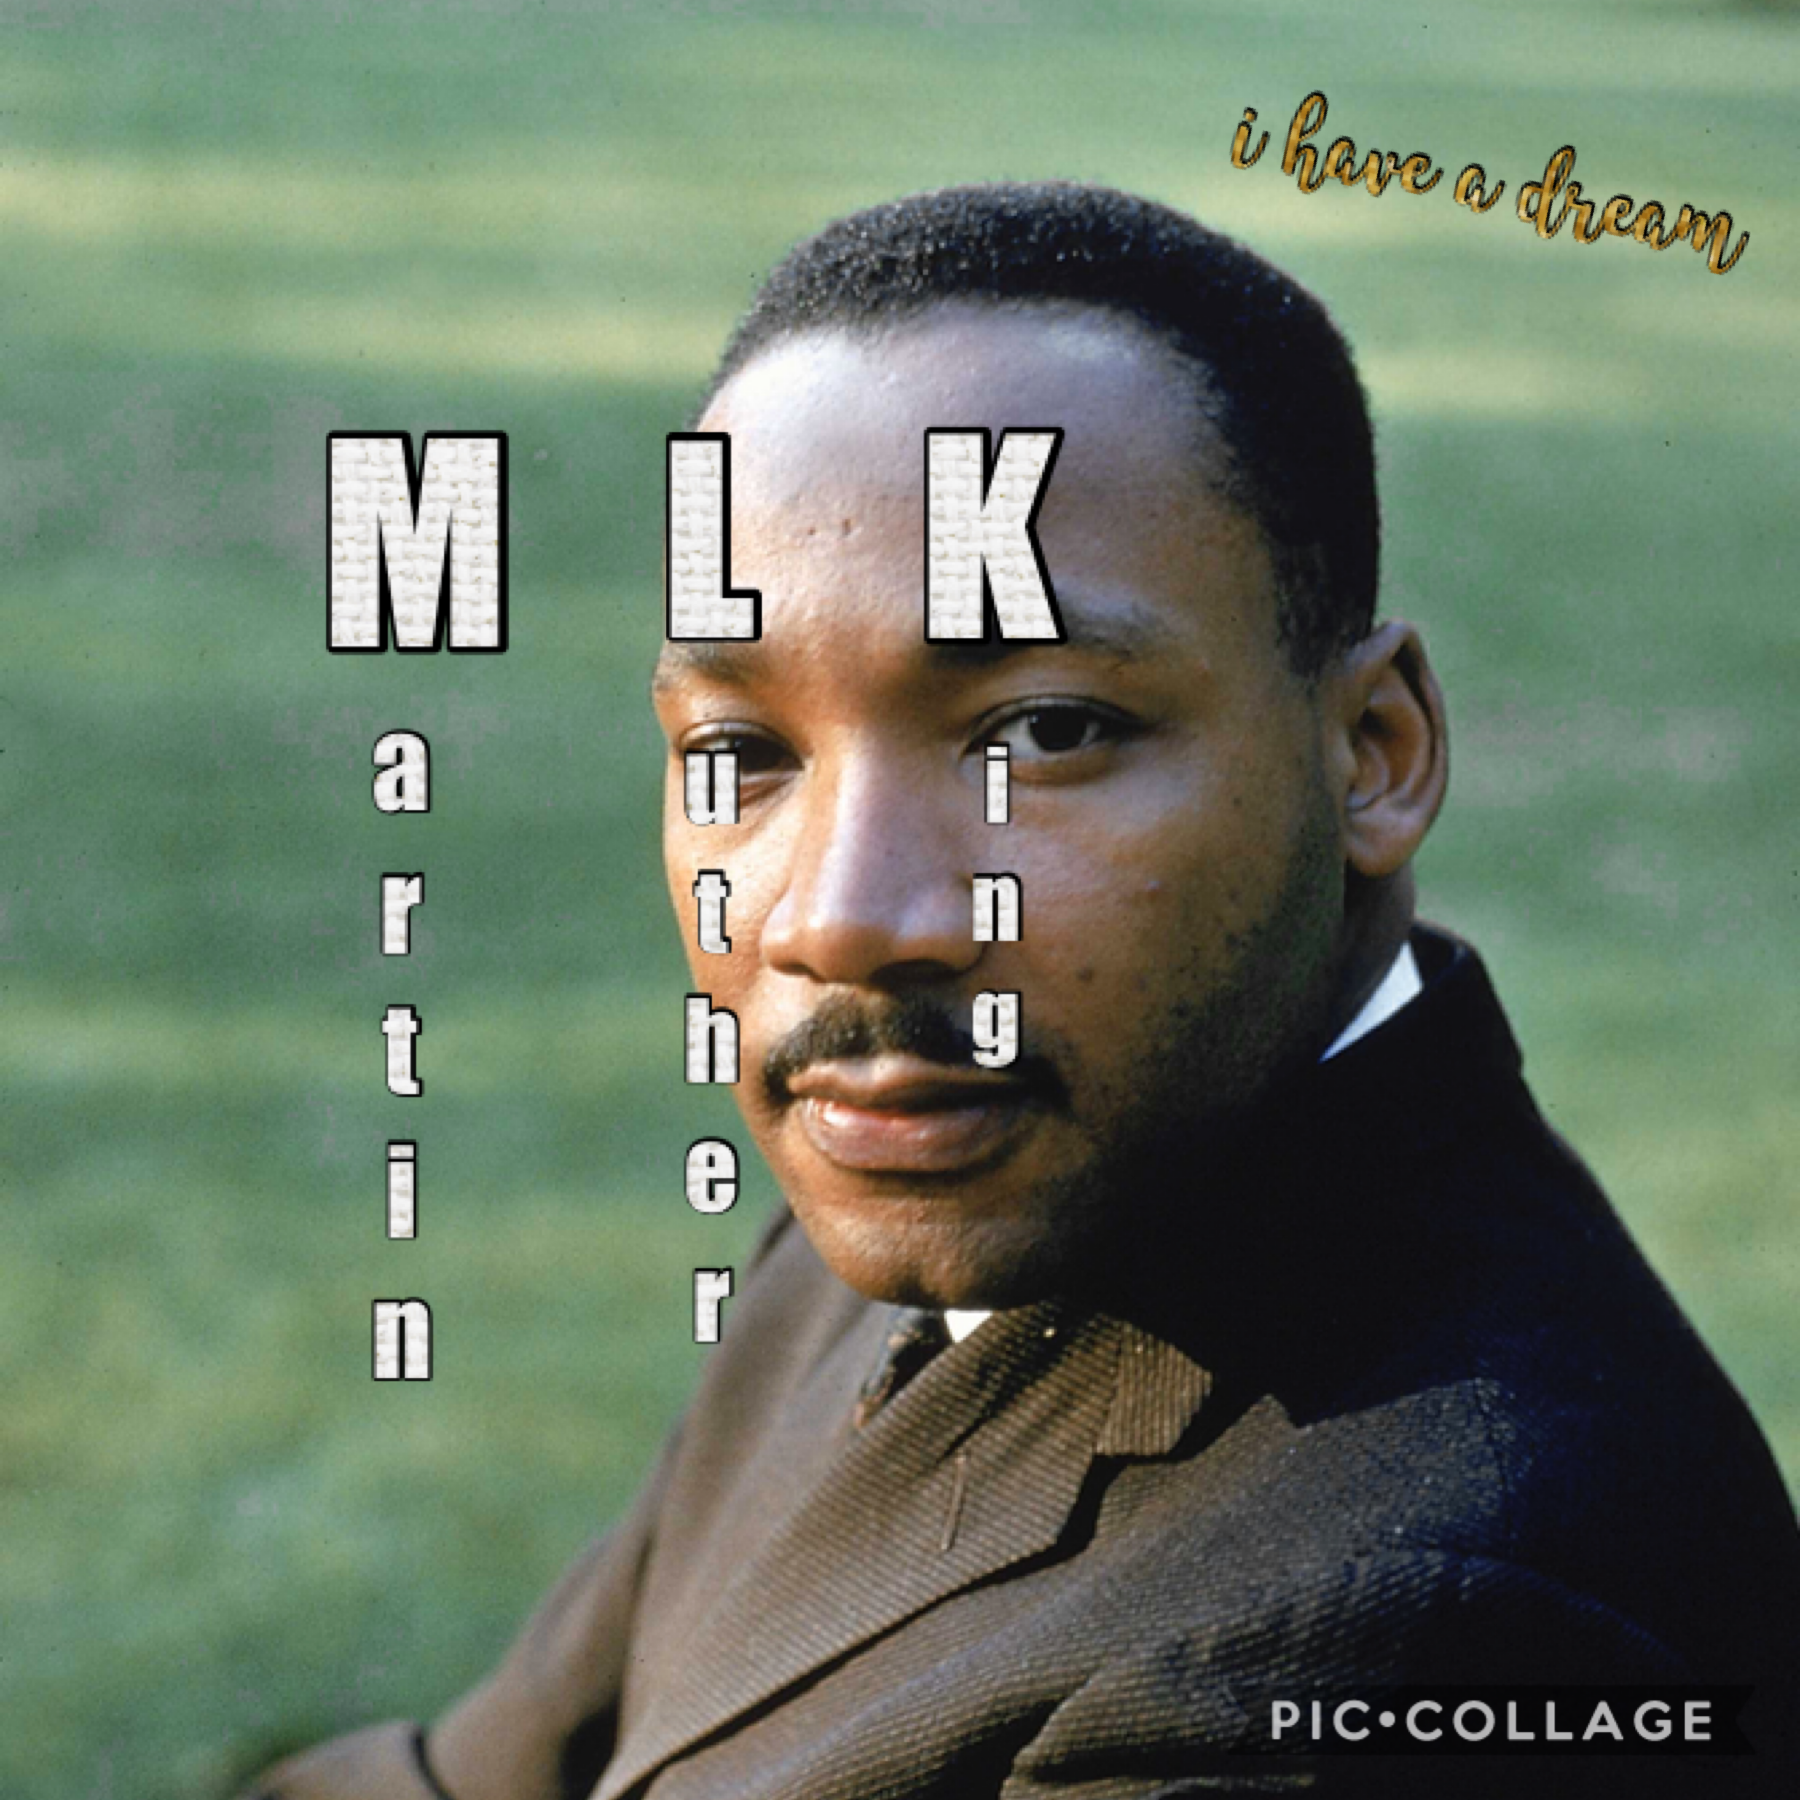 happy martin luther king day!!!